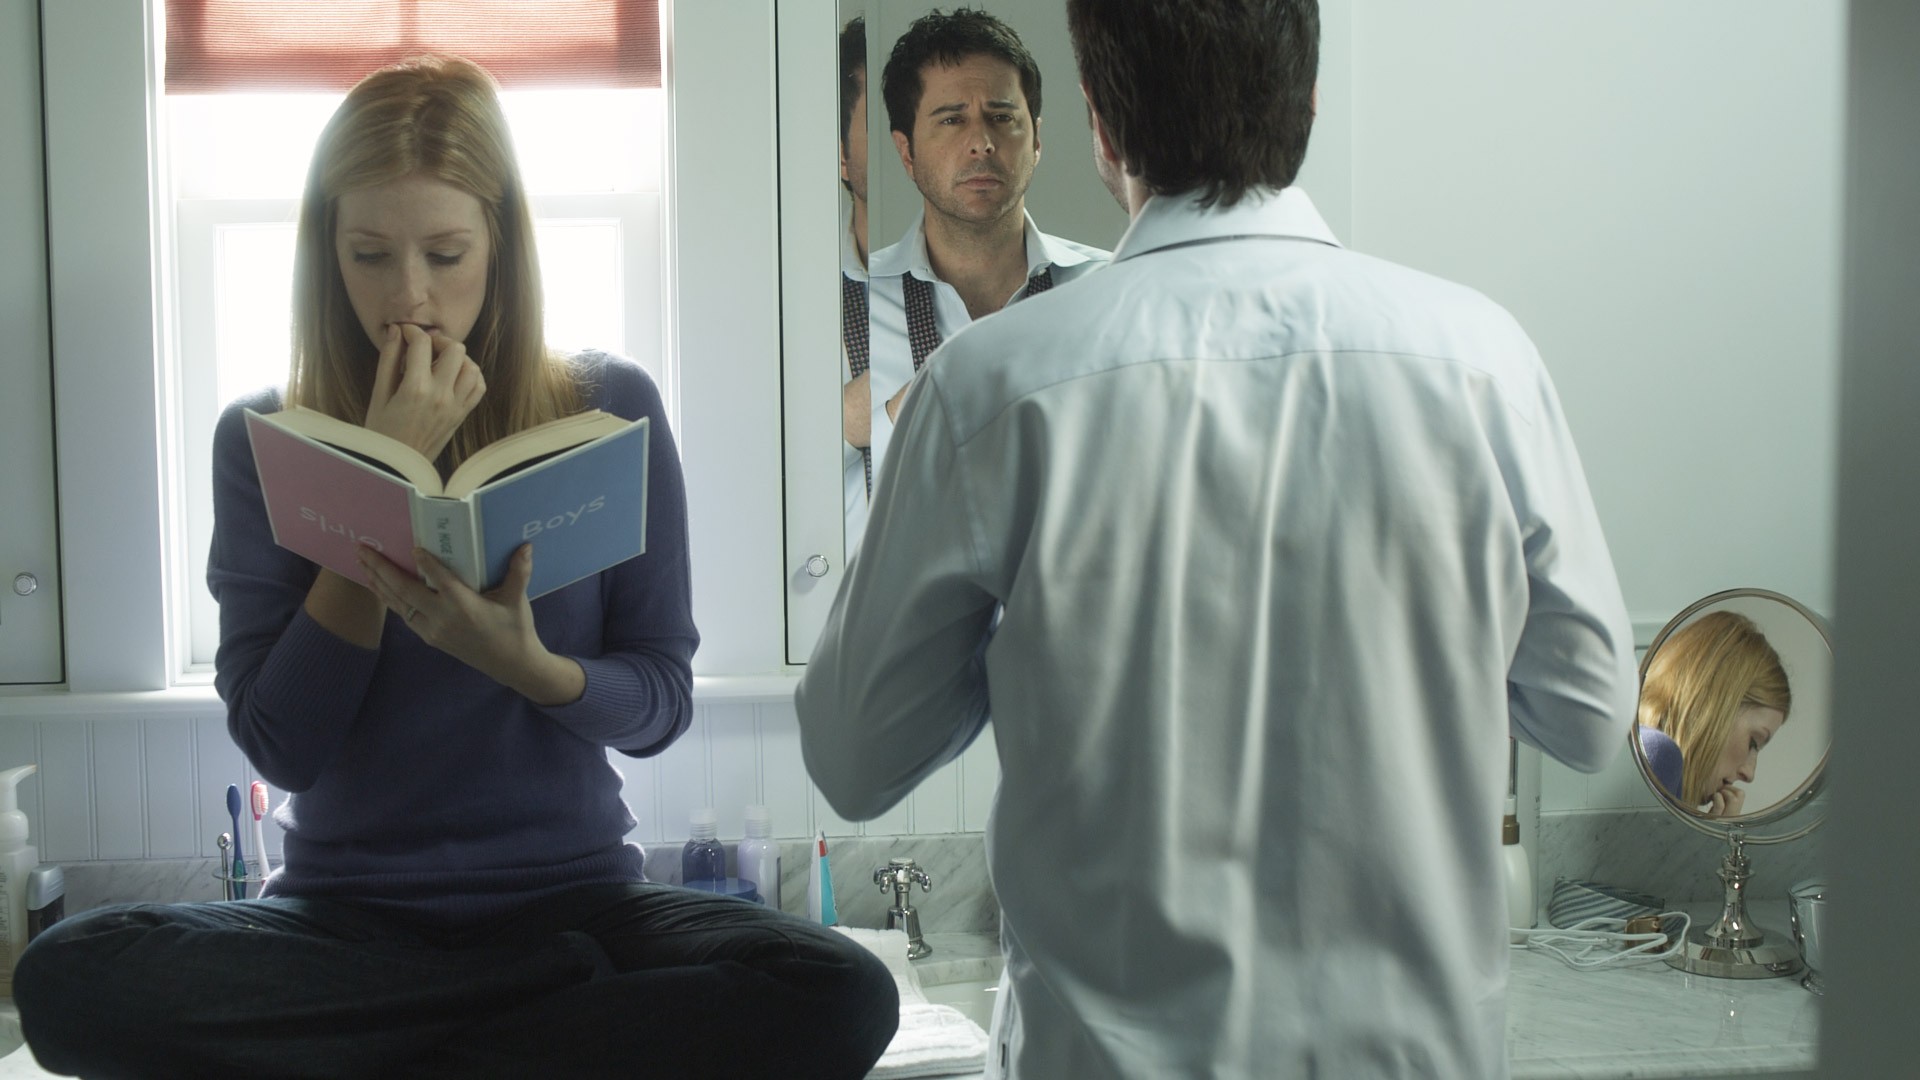 Jennifer Finnigan stars as Laurie and Jonathan Silverman stars as Brad in Tribeca Film's Conception (2012). Photo credit by Noah Rosenthal.